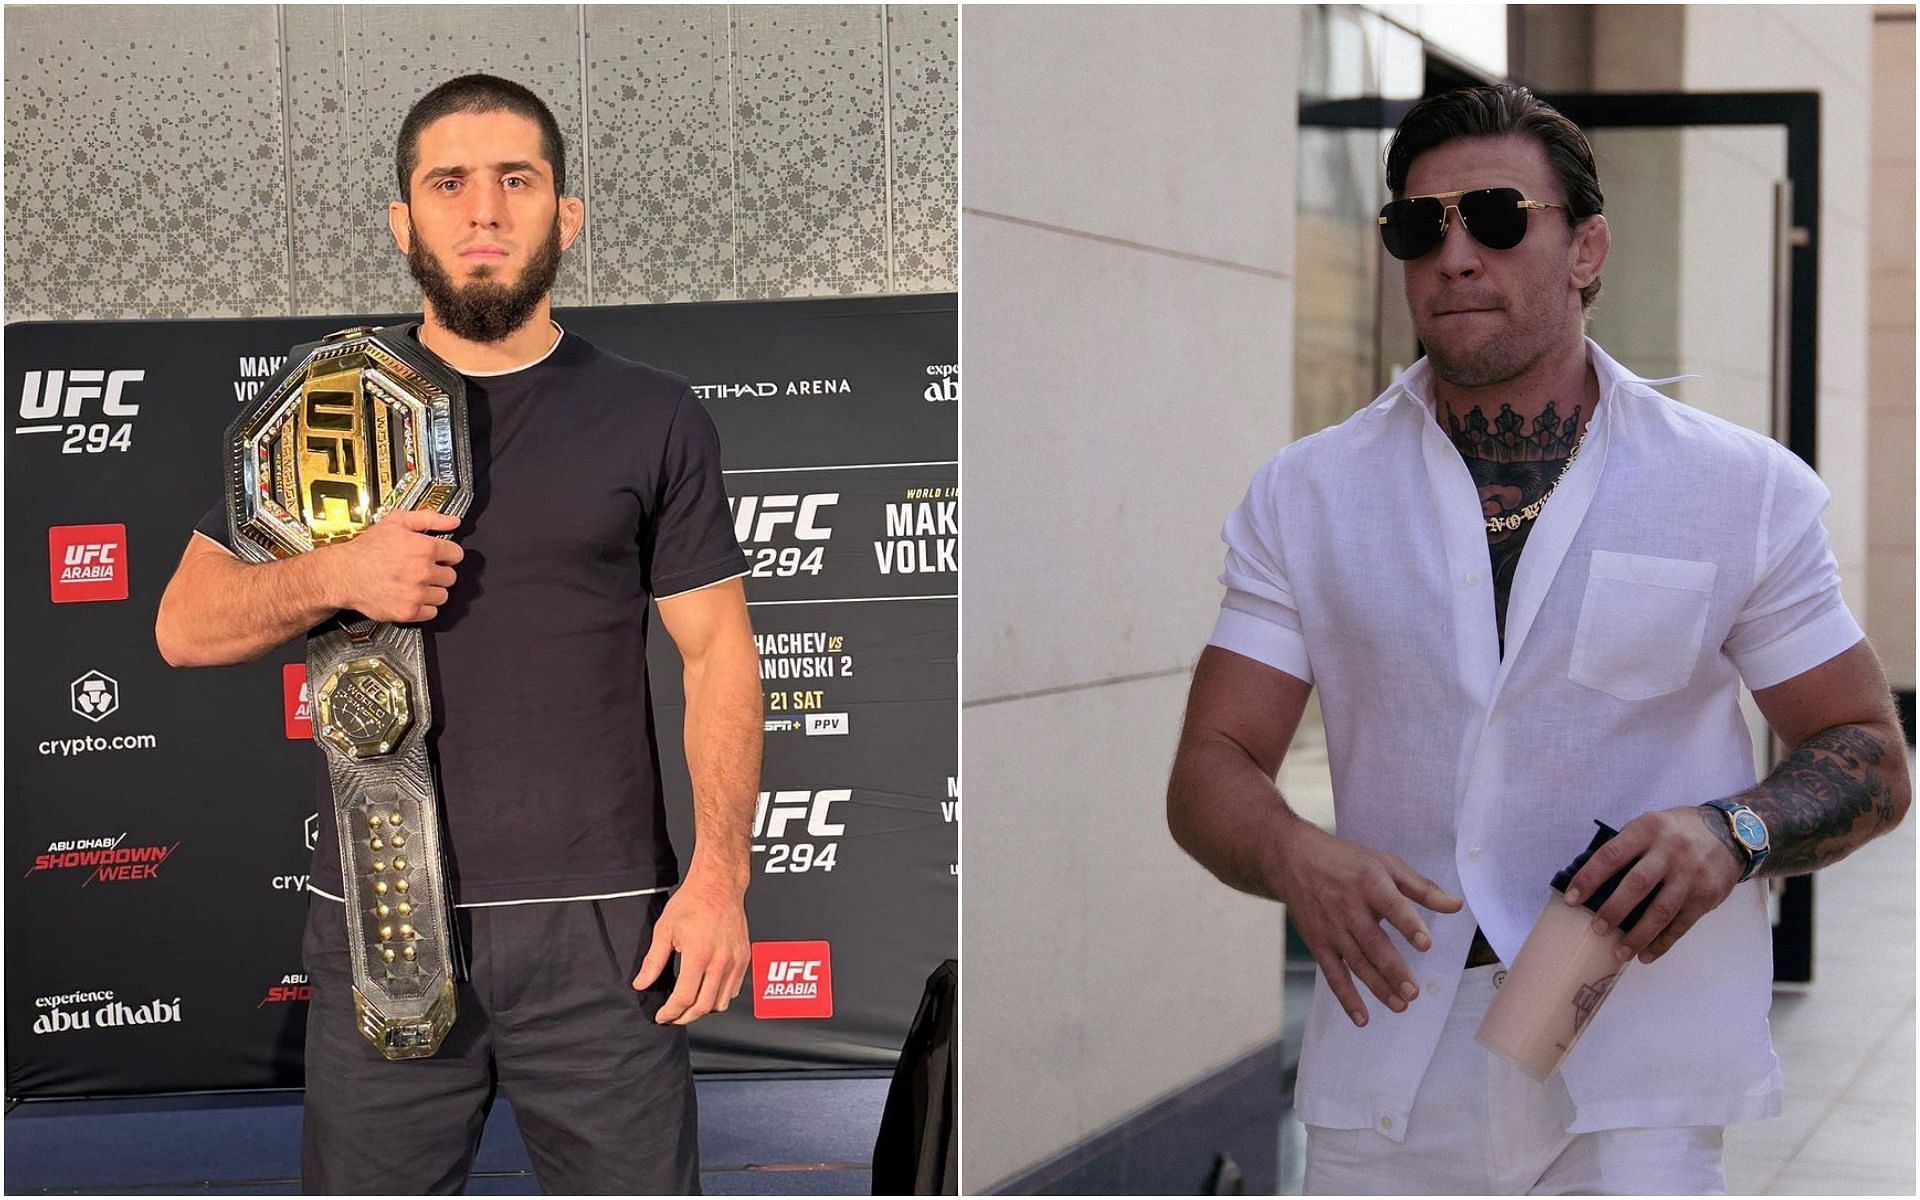 Islam Makhachev and Conor McGregor